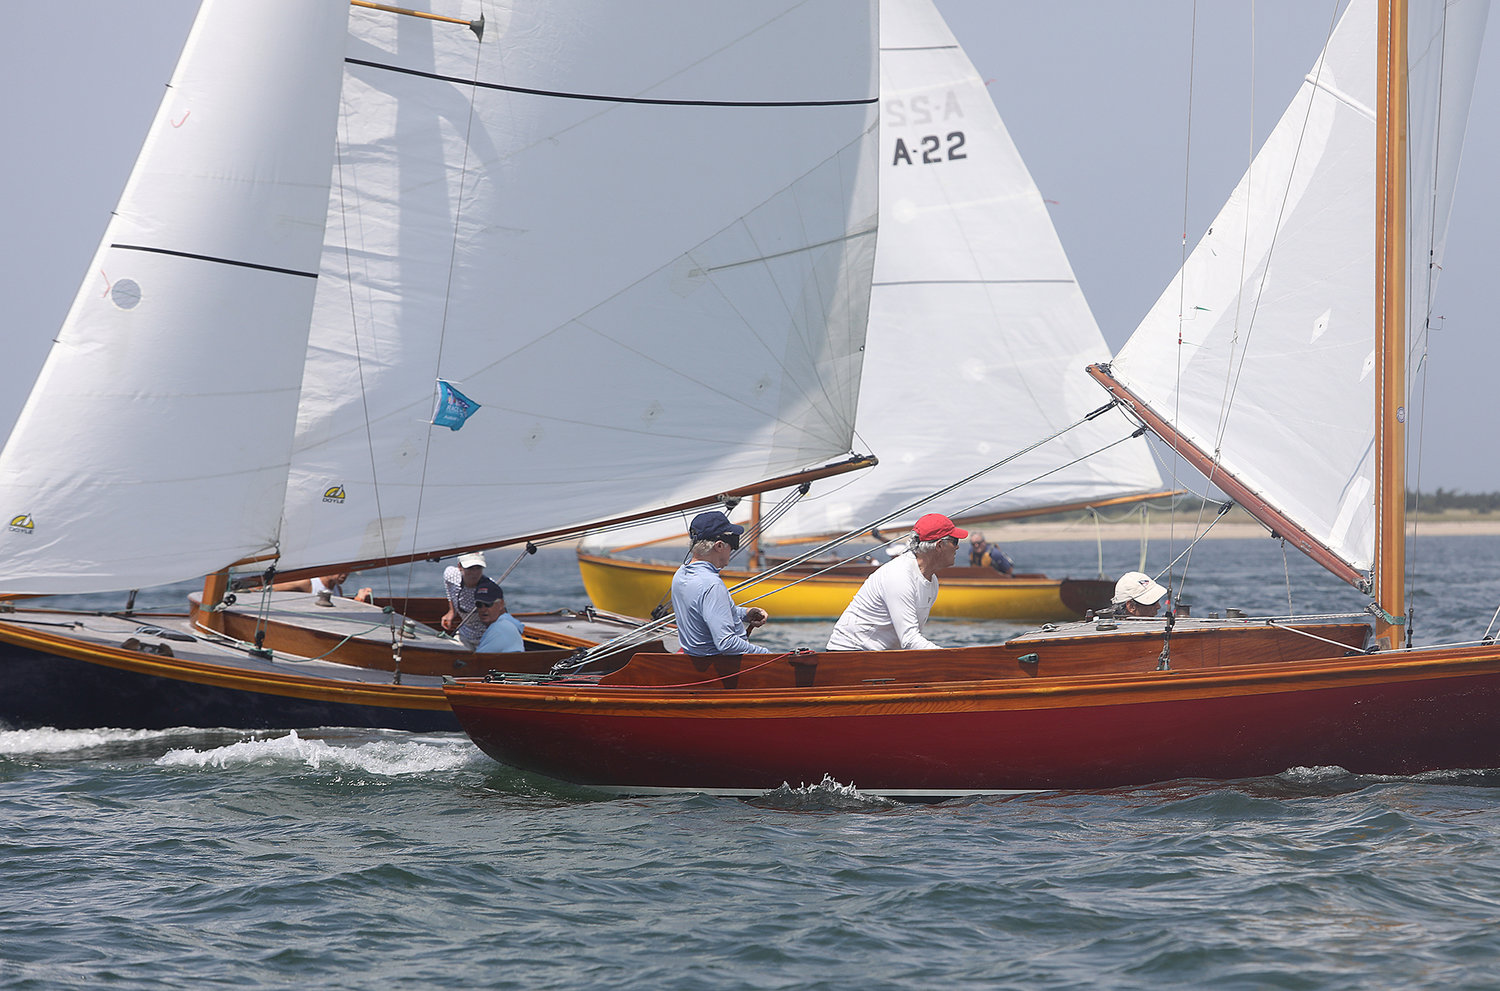 Alerions sailing close as they round the windward mark during the One Design Regatta in Nantucket Harbor on the opening day of Race Week 2021.